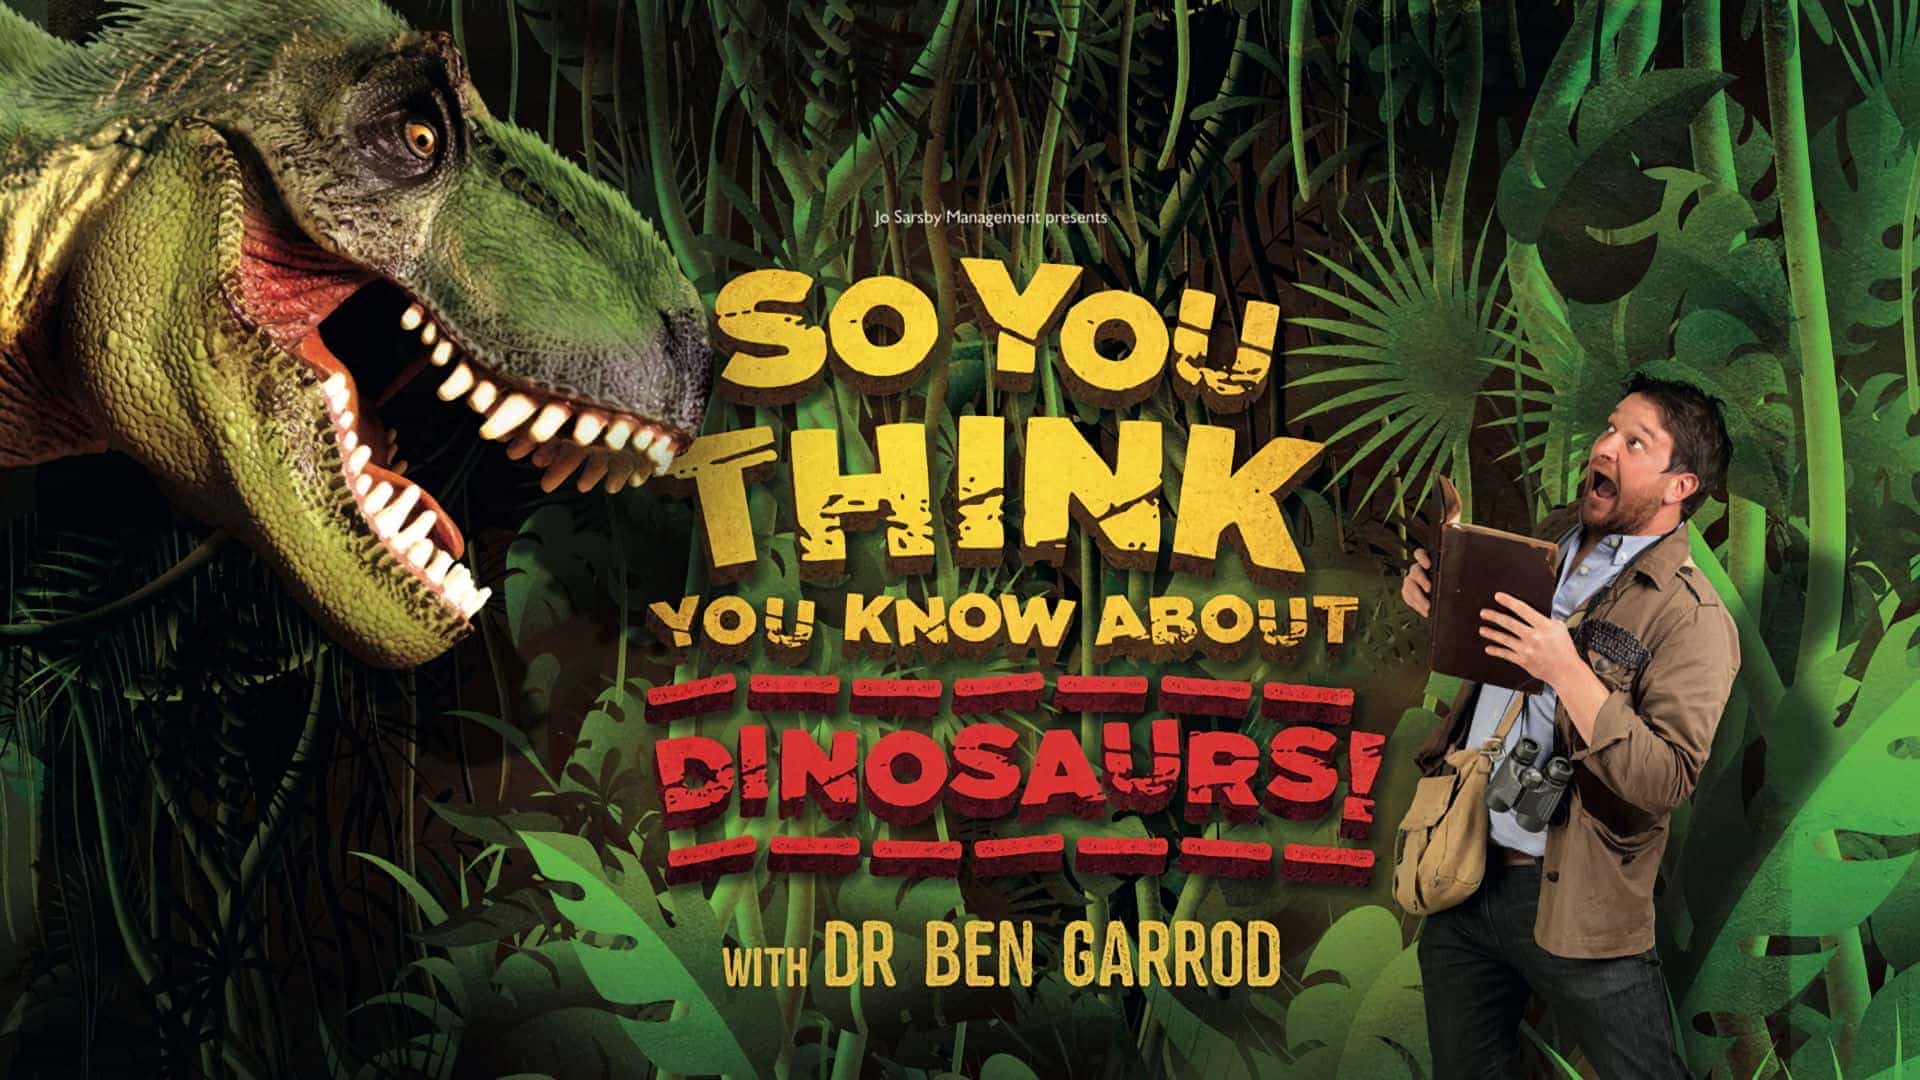 So You Think You Know About Dinosaurs!